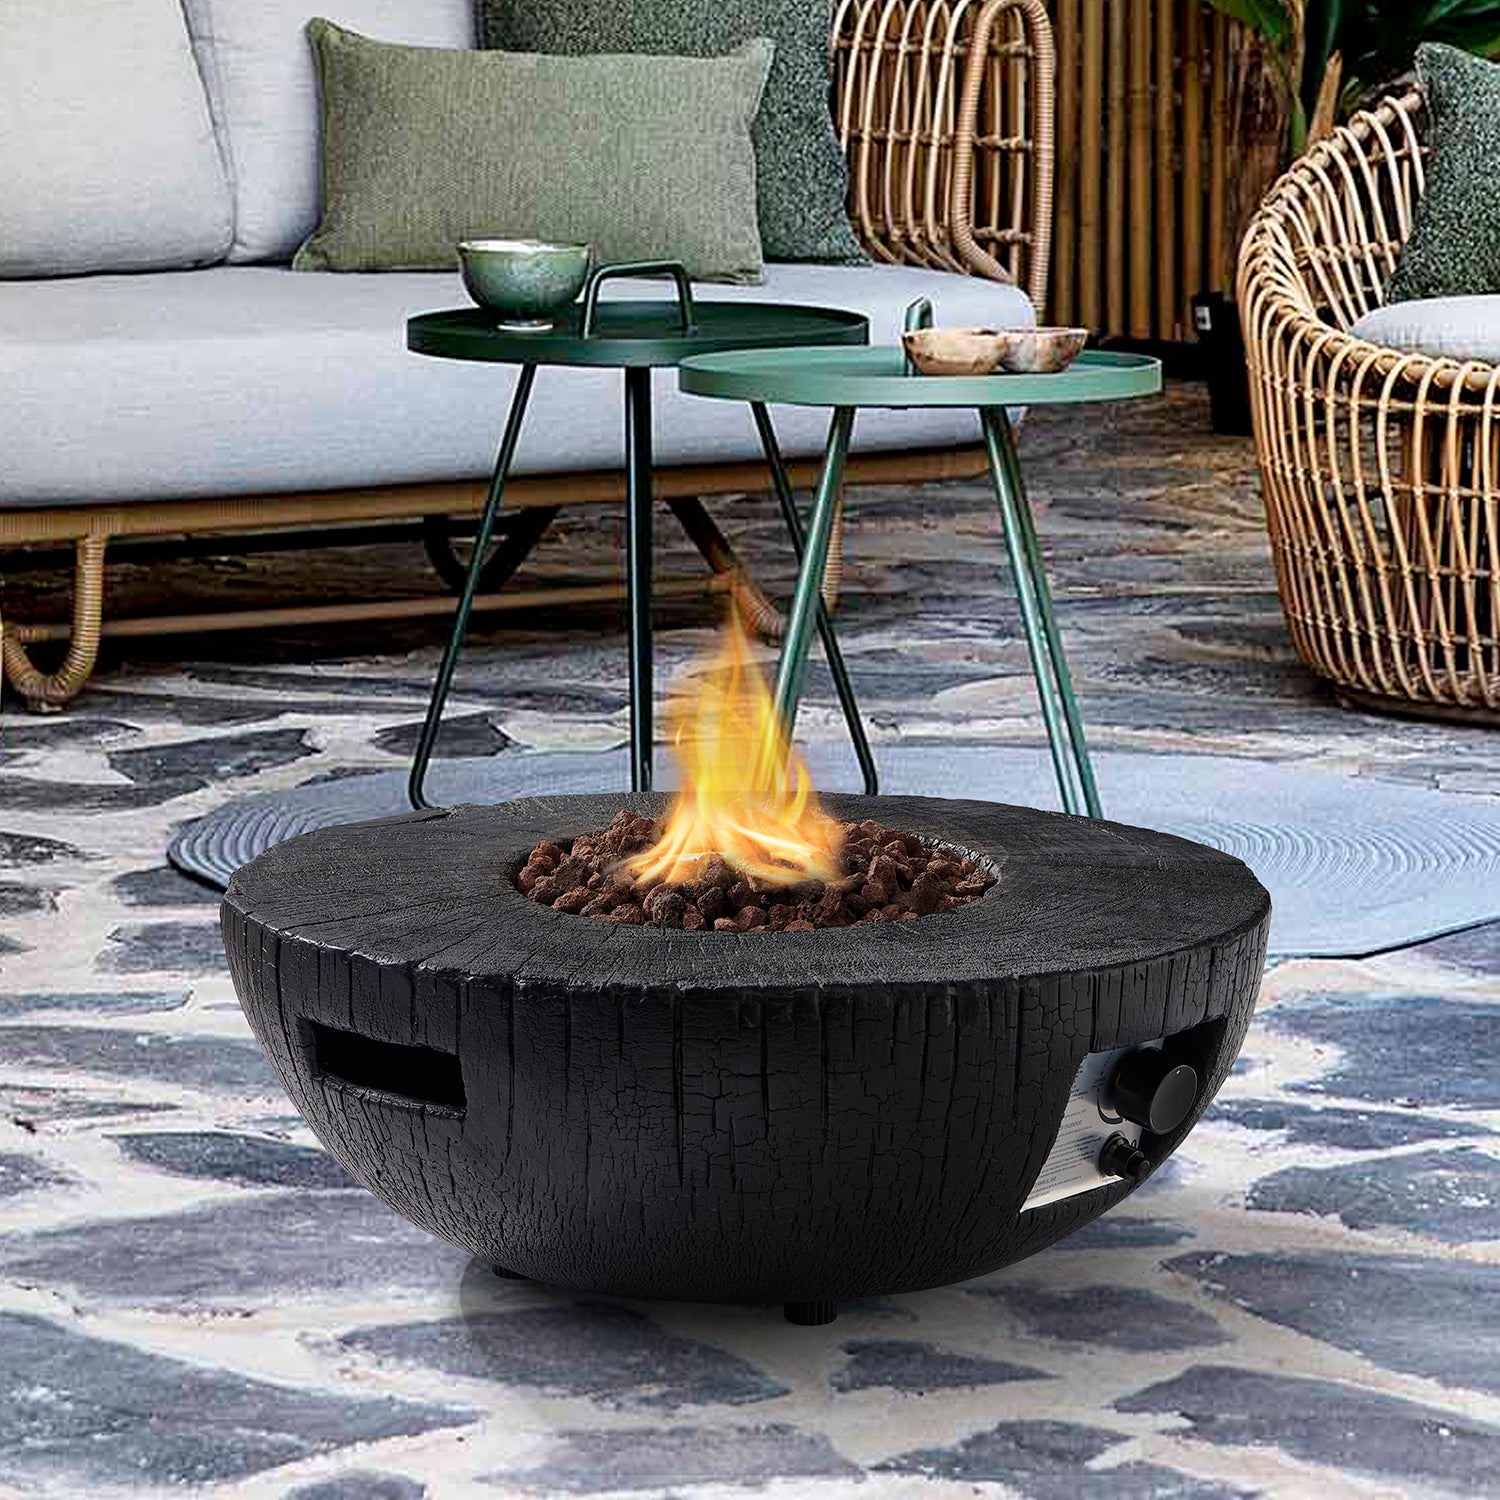 Round Outdoor Charred Wood Effect Concrete Gas Fire Bowl